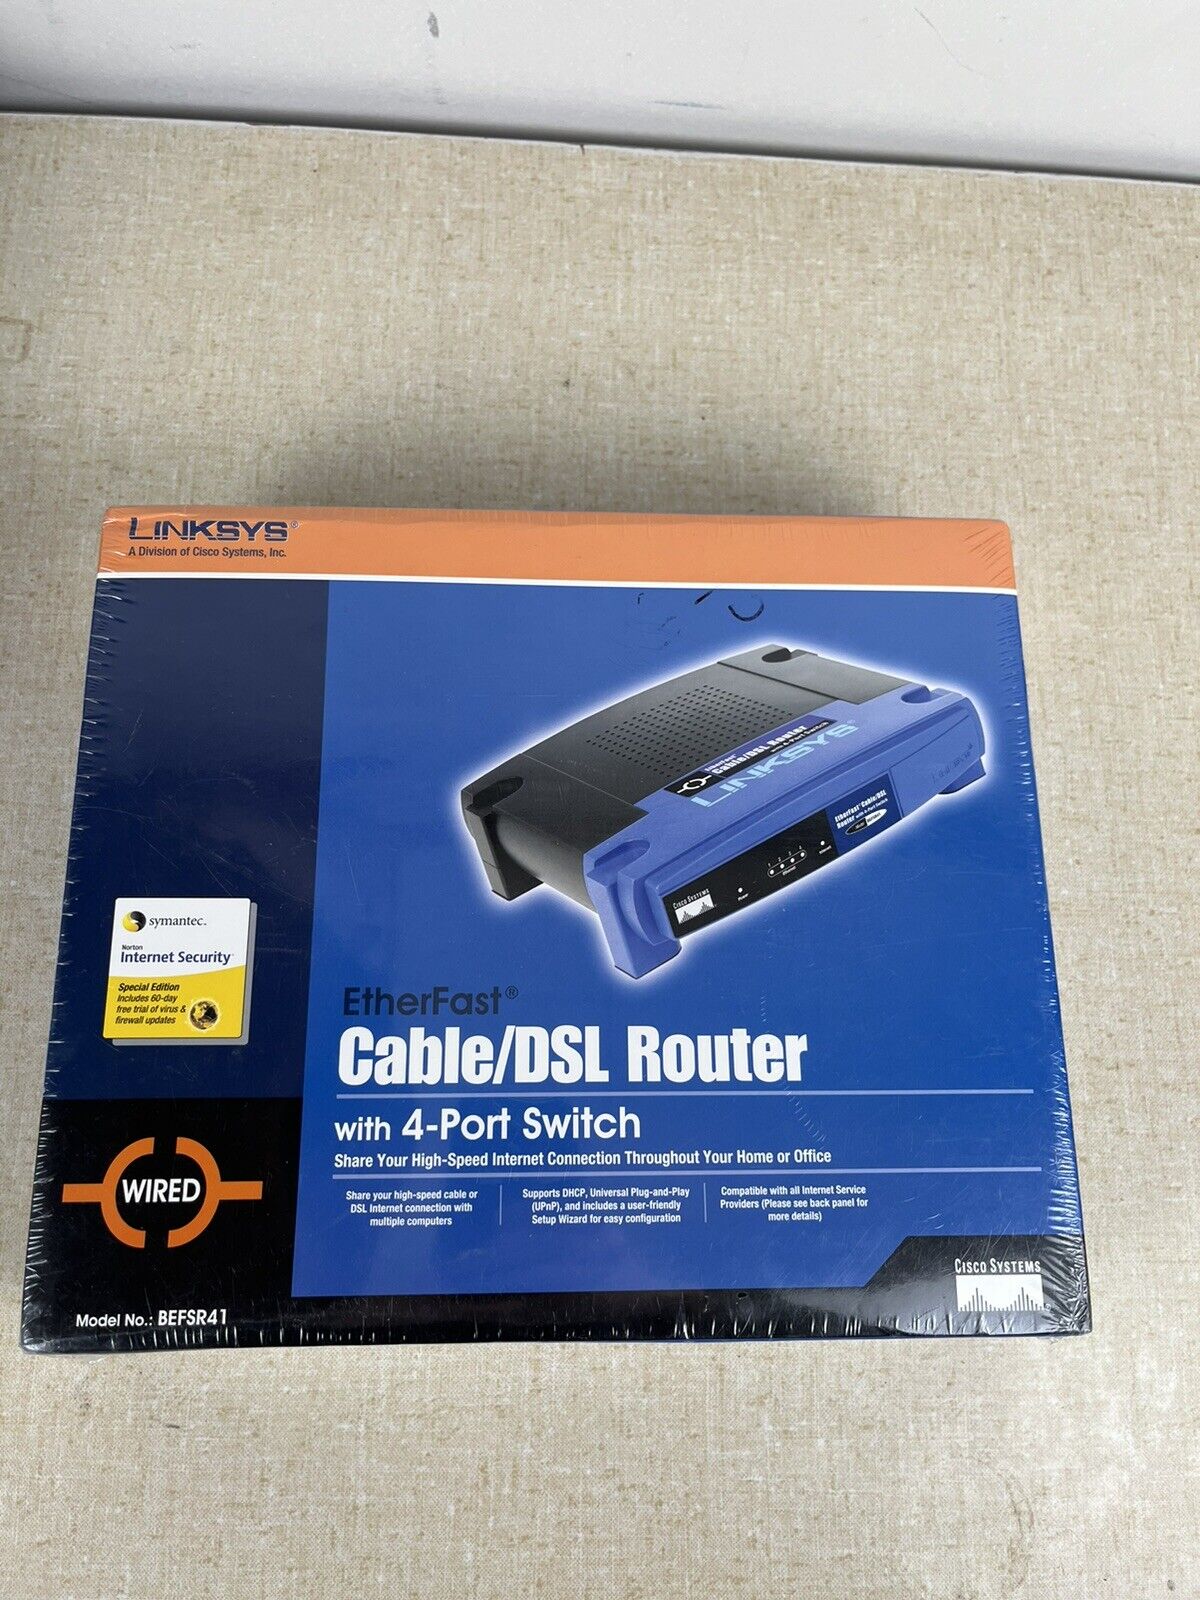 Linksys BEFSR41 Cable/DSL Router with 4-Port Switch Sealed Brand New